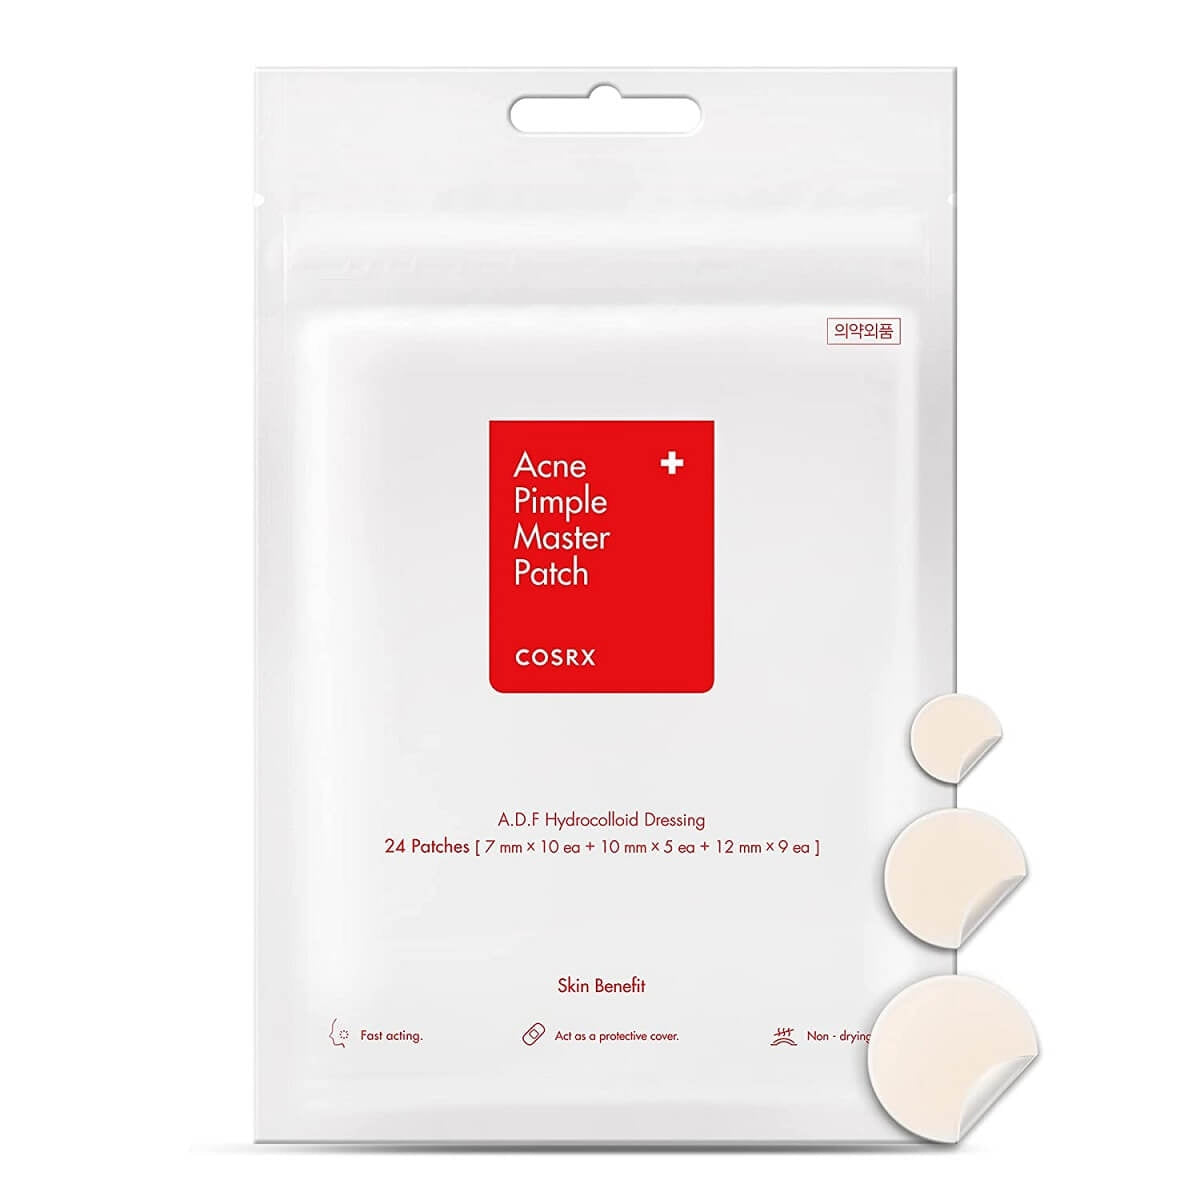 COSRX (Official) Acne Pimple Master Patch 24 Patches